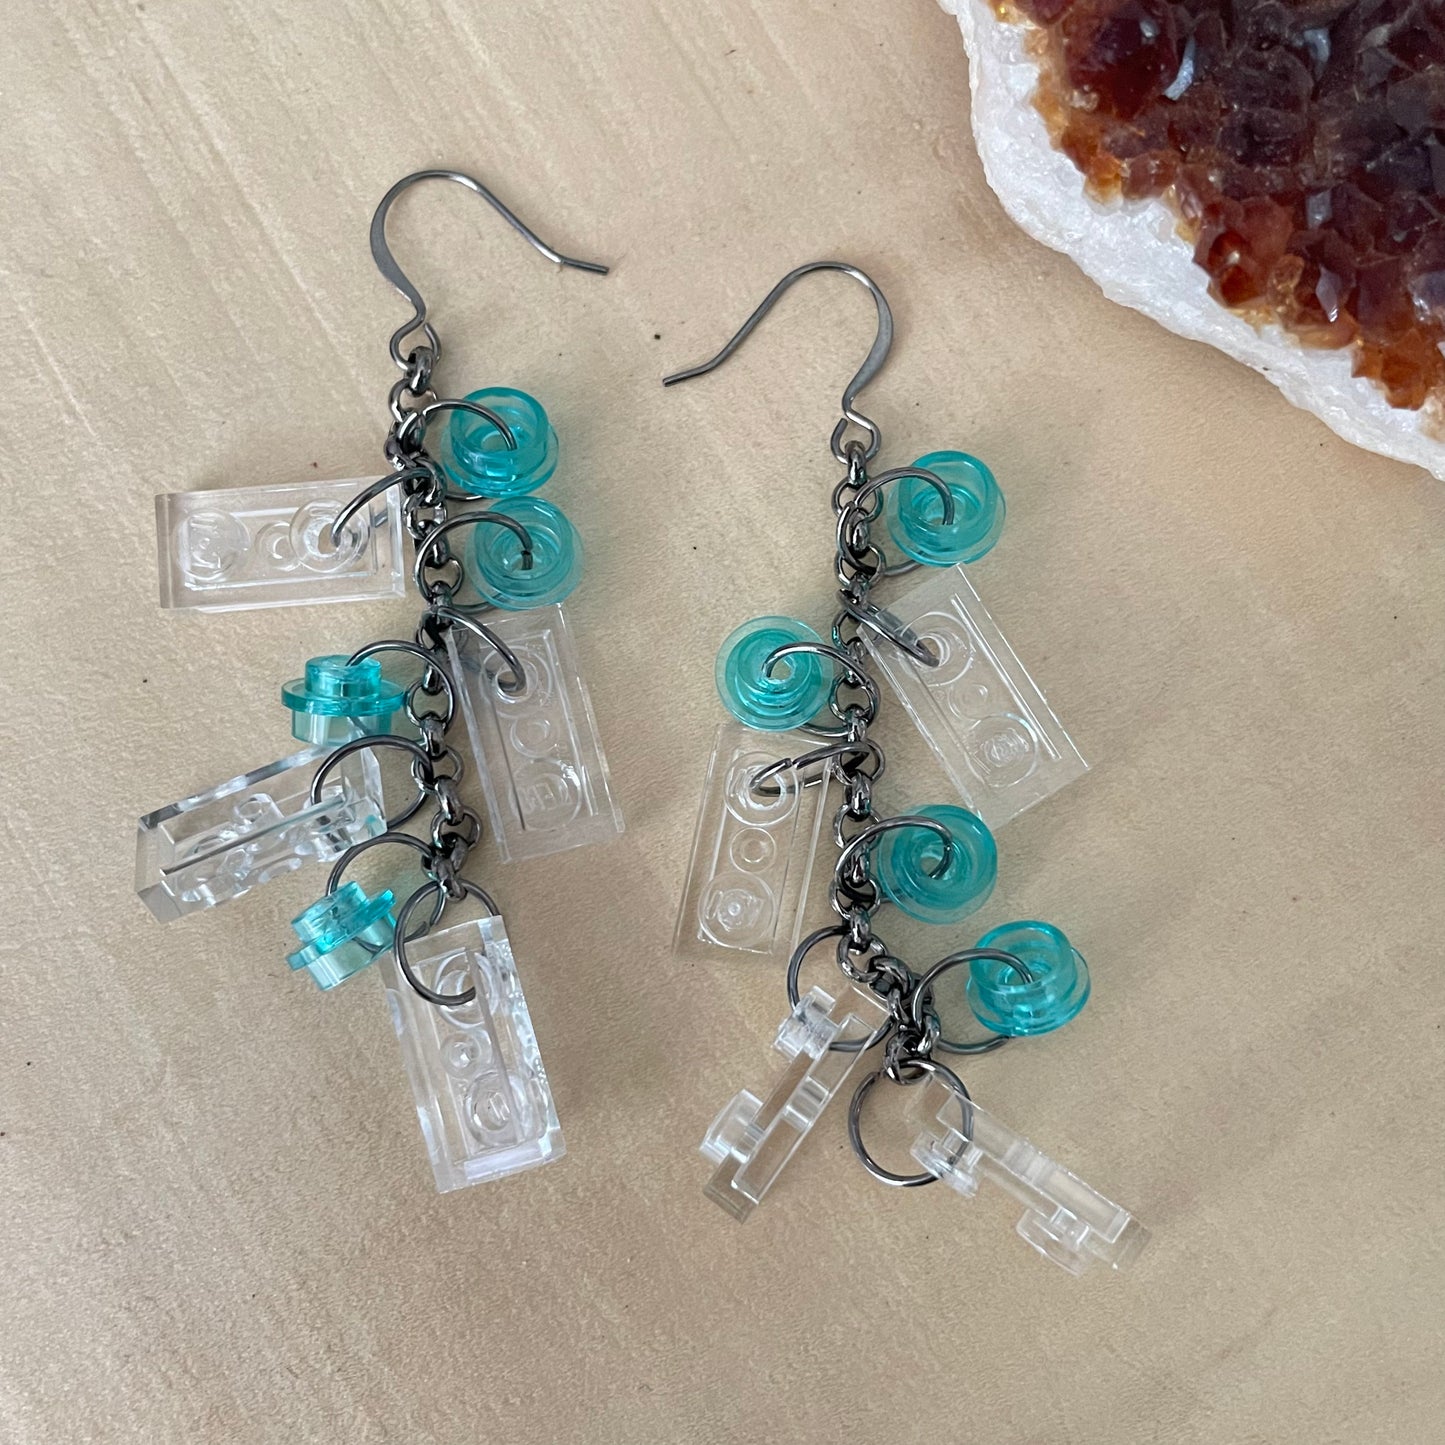 Long Geometric Building Block & Gunmetal Earrings 3" Dangle Playful Colorful Light Blue Clear Repurposed Upcycled Lego